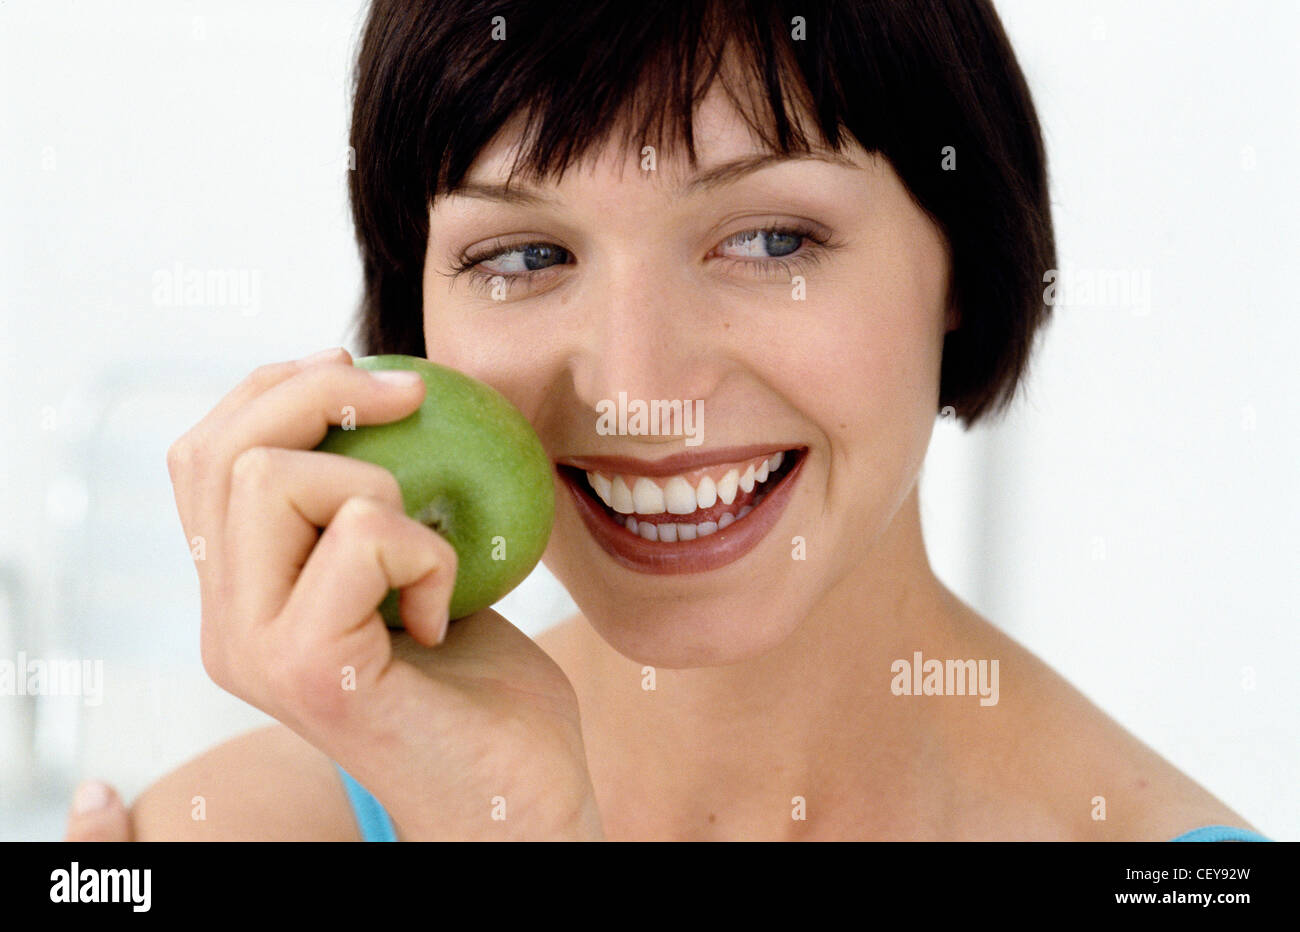 A  Female looking to the right holding a green apple Stock Photo